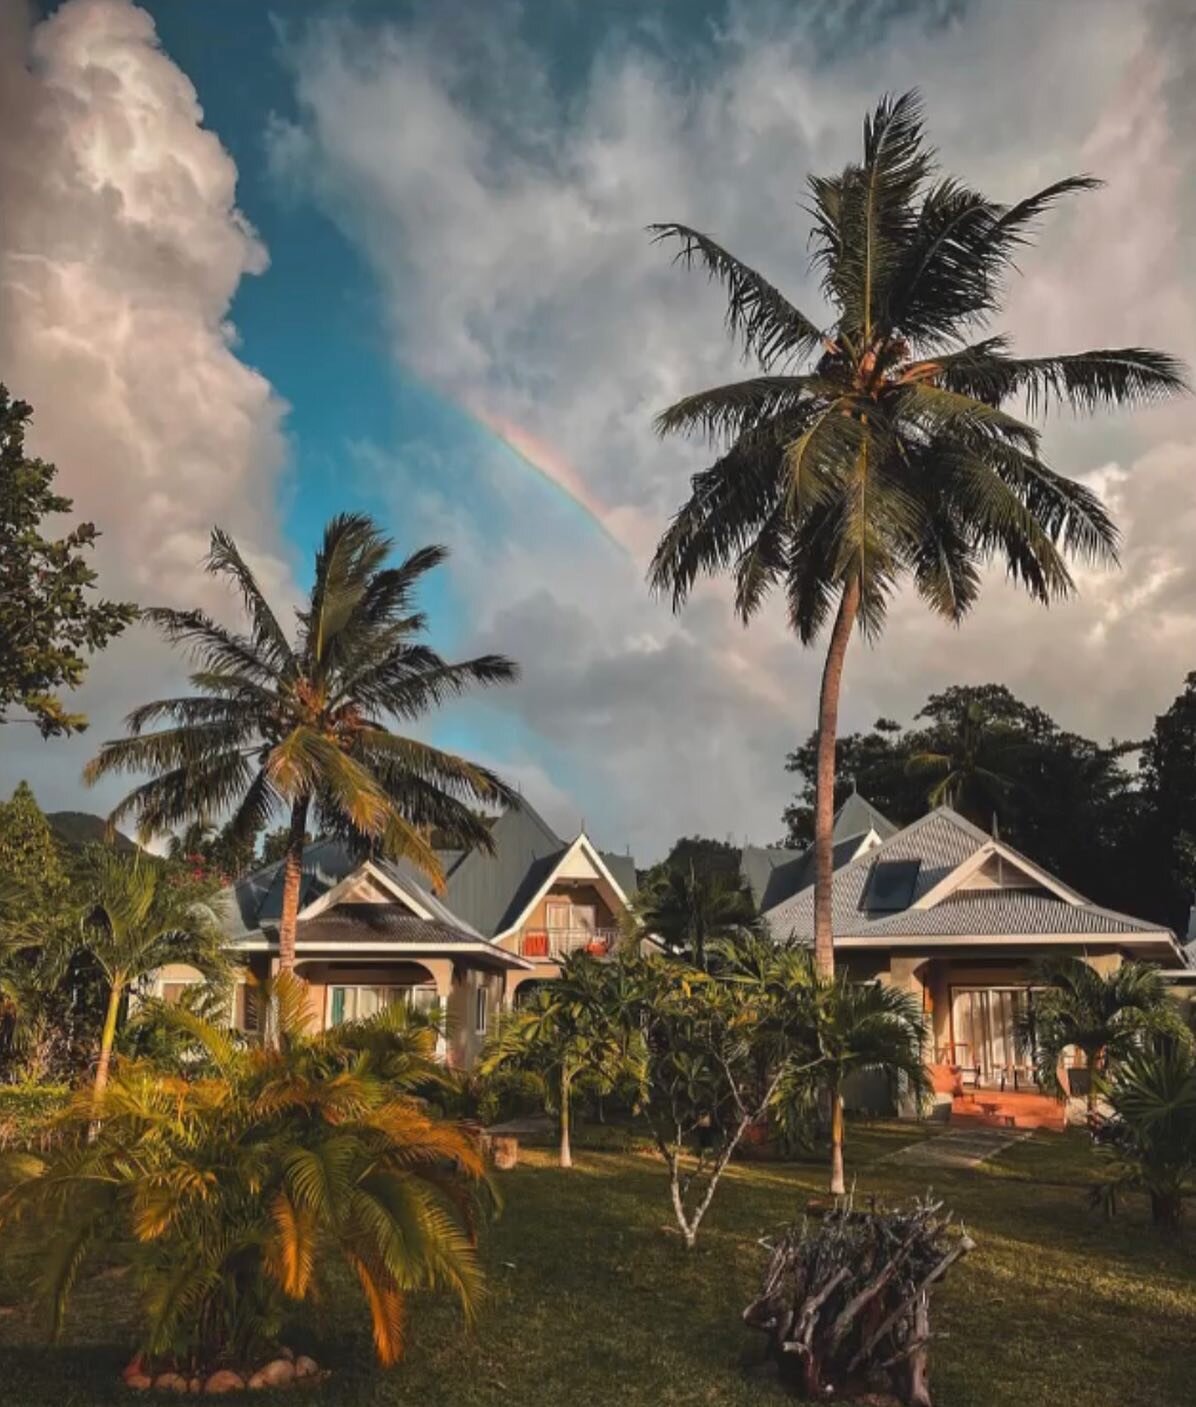 🌈 over Footprints. We love seeing the place through our guest&rsquo;s lens.

This gorgeous picture was taken by the talented @sundelight_travel .
💙

#rainbow #seychellesfootprints #islandstyle #islandlife #praslinvisit #familytravel #seychellesisla